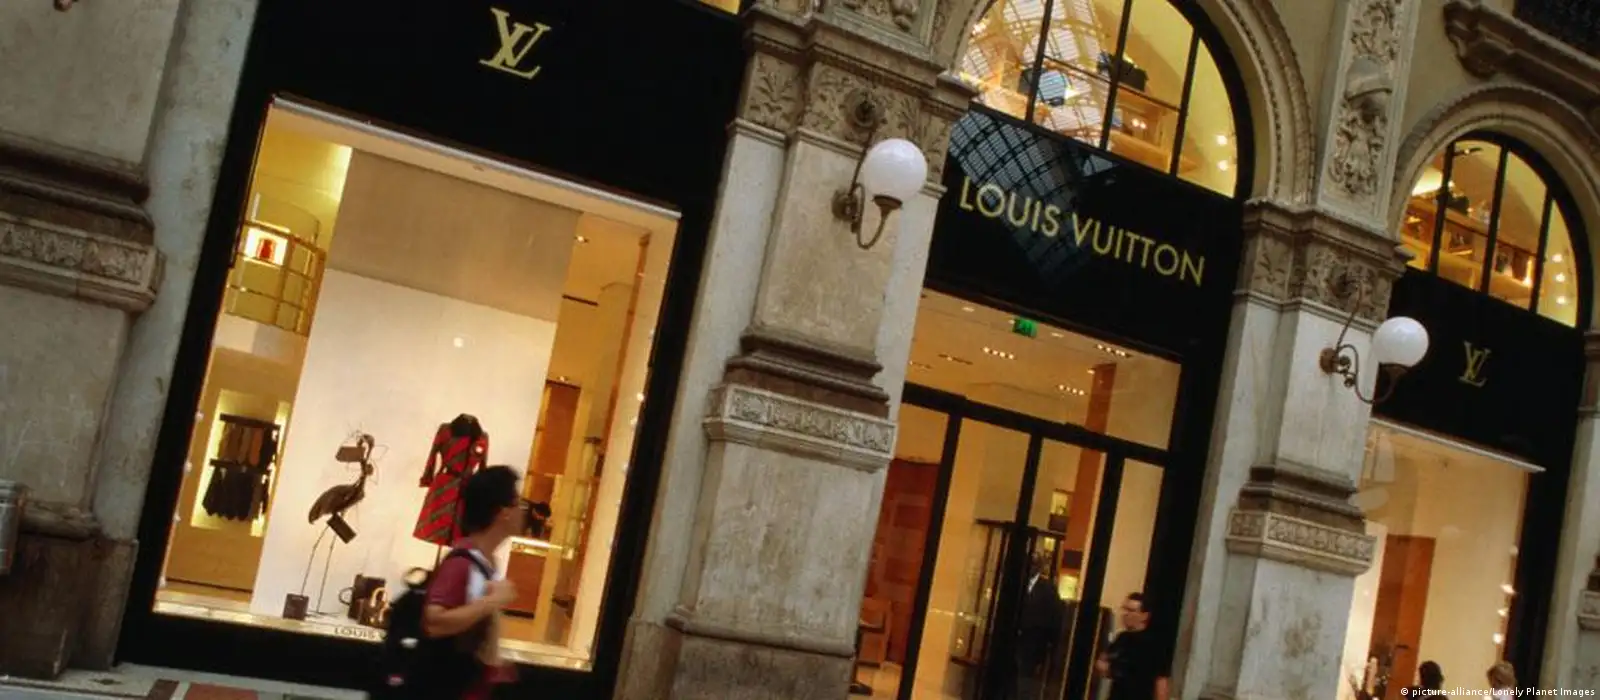 LVMH Shares Rise Amid Strong Demand for Wines and Spirits